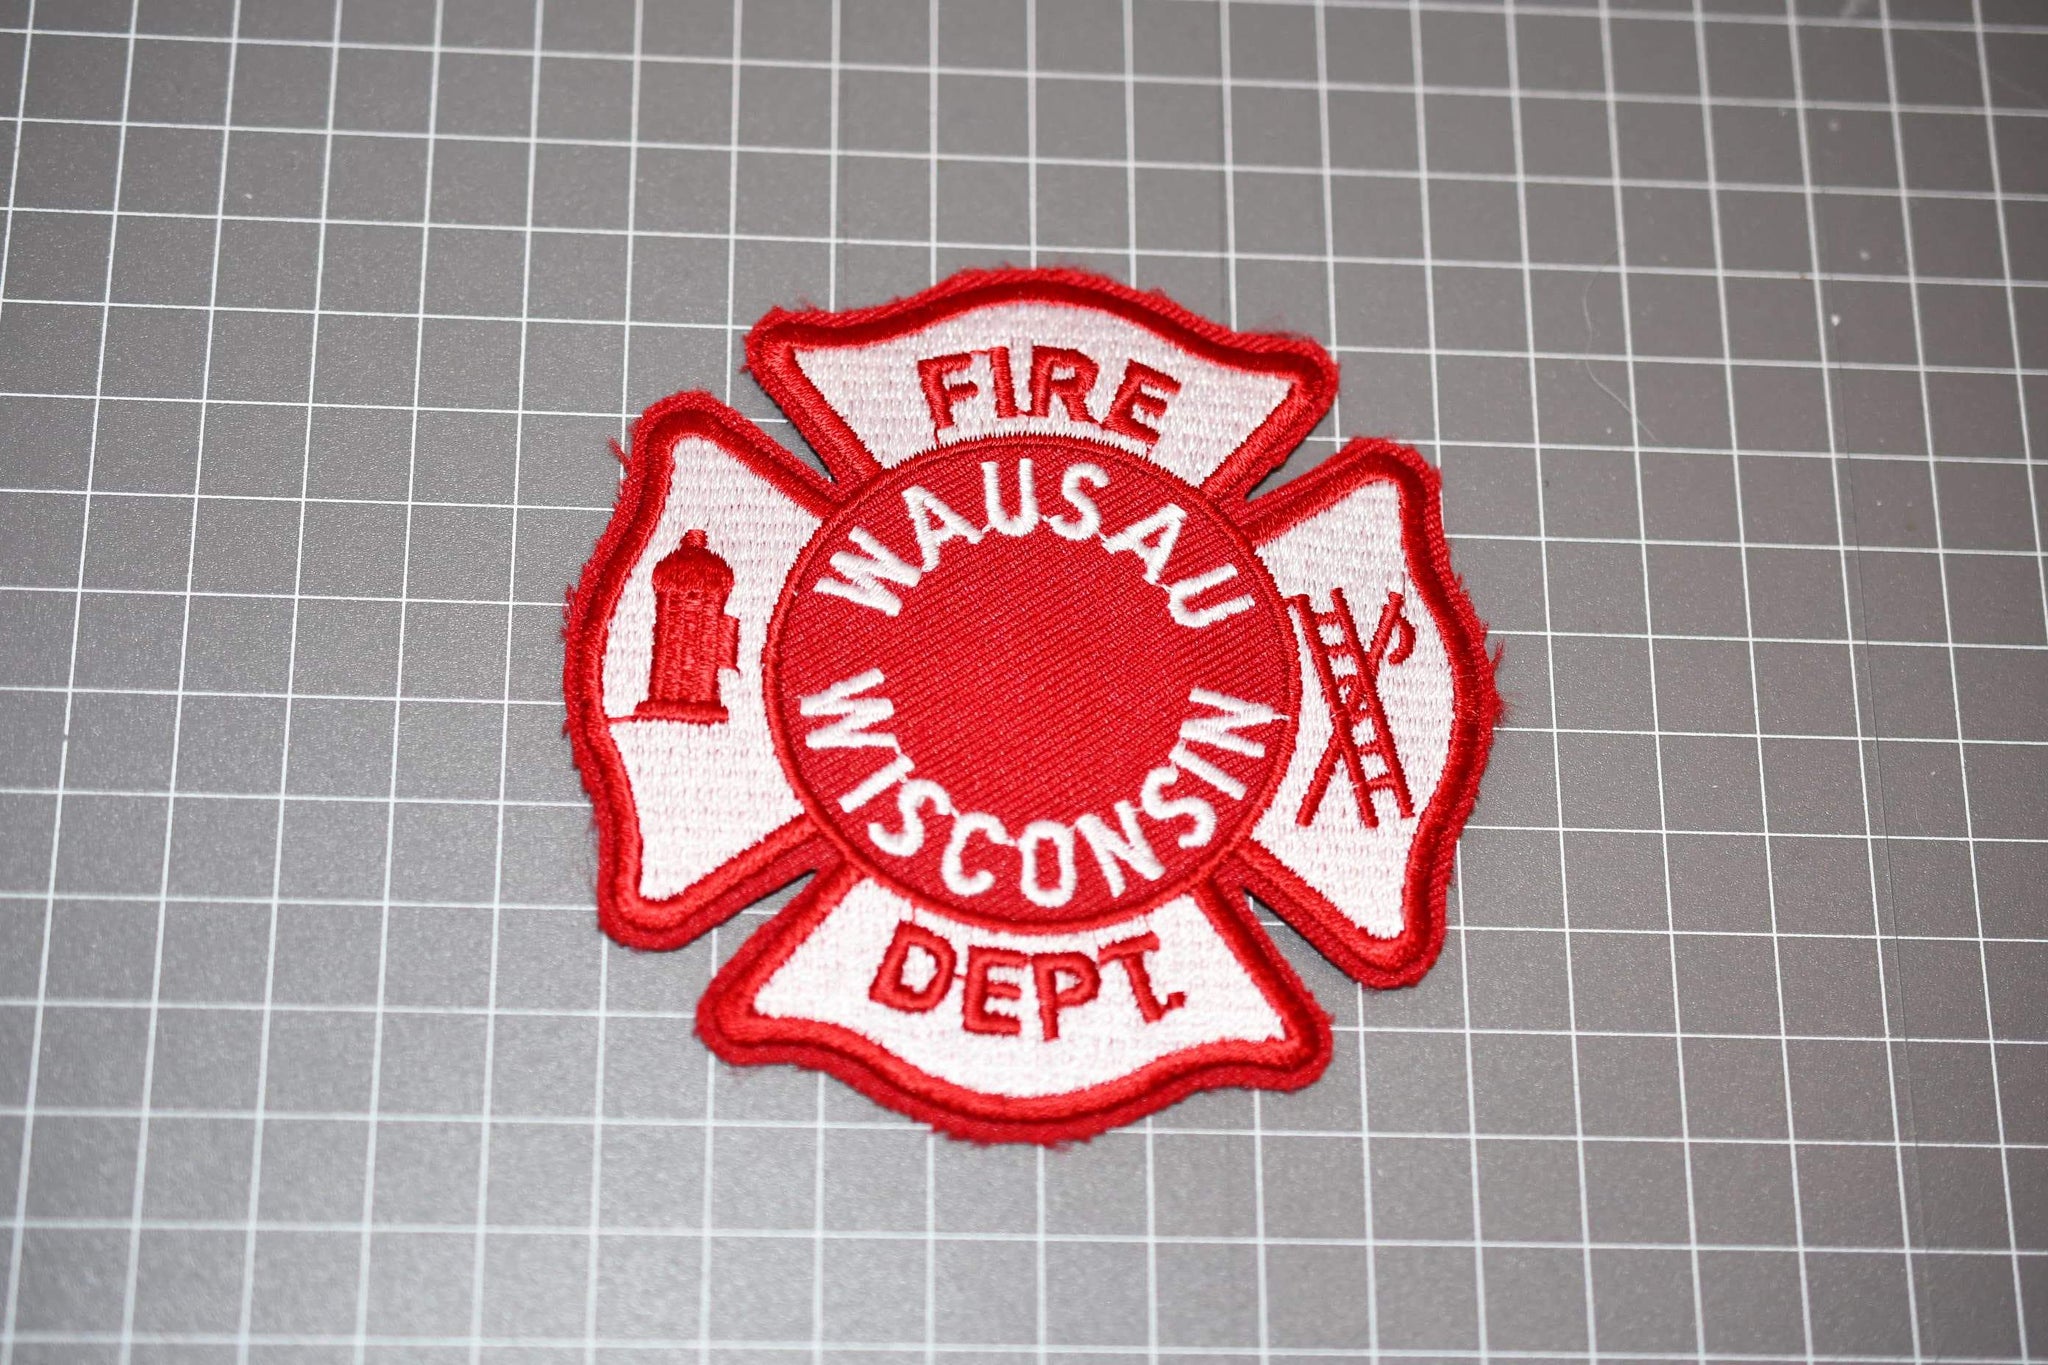 Wausau Wisconsin Fire Department Patch (U.S. Fire Patches)